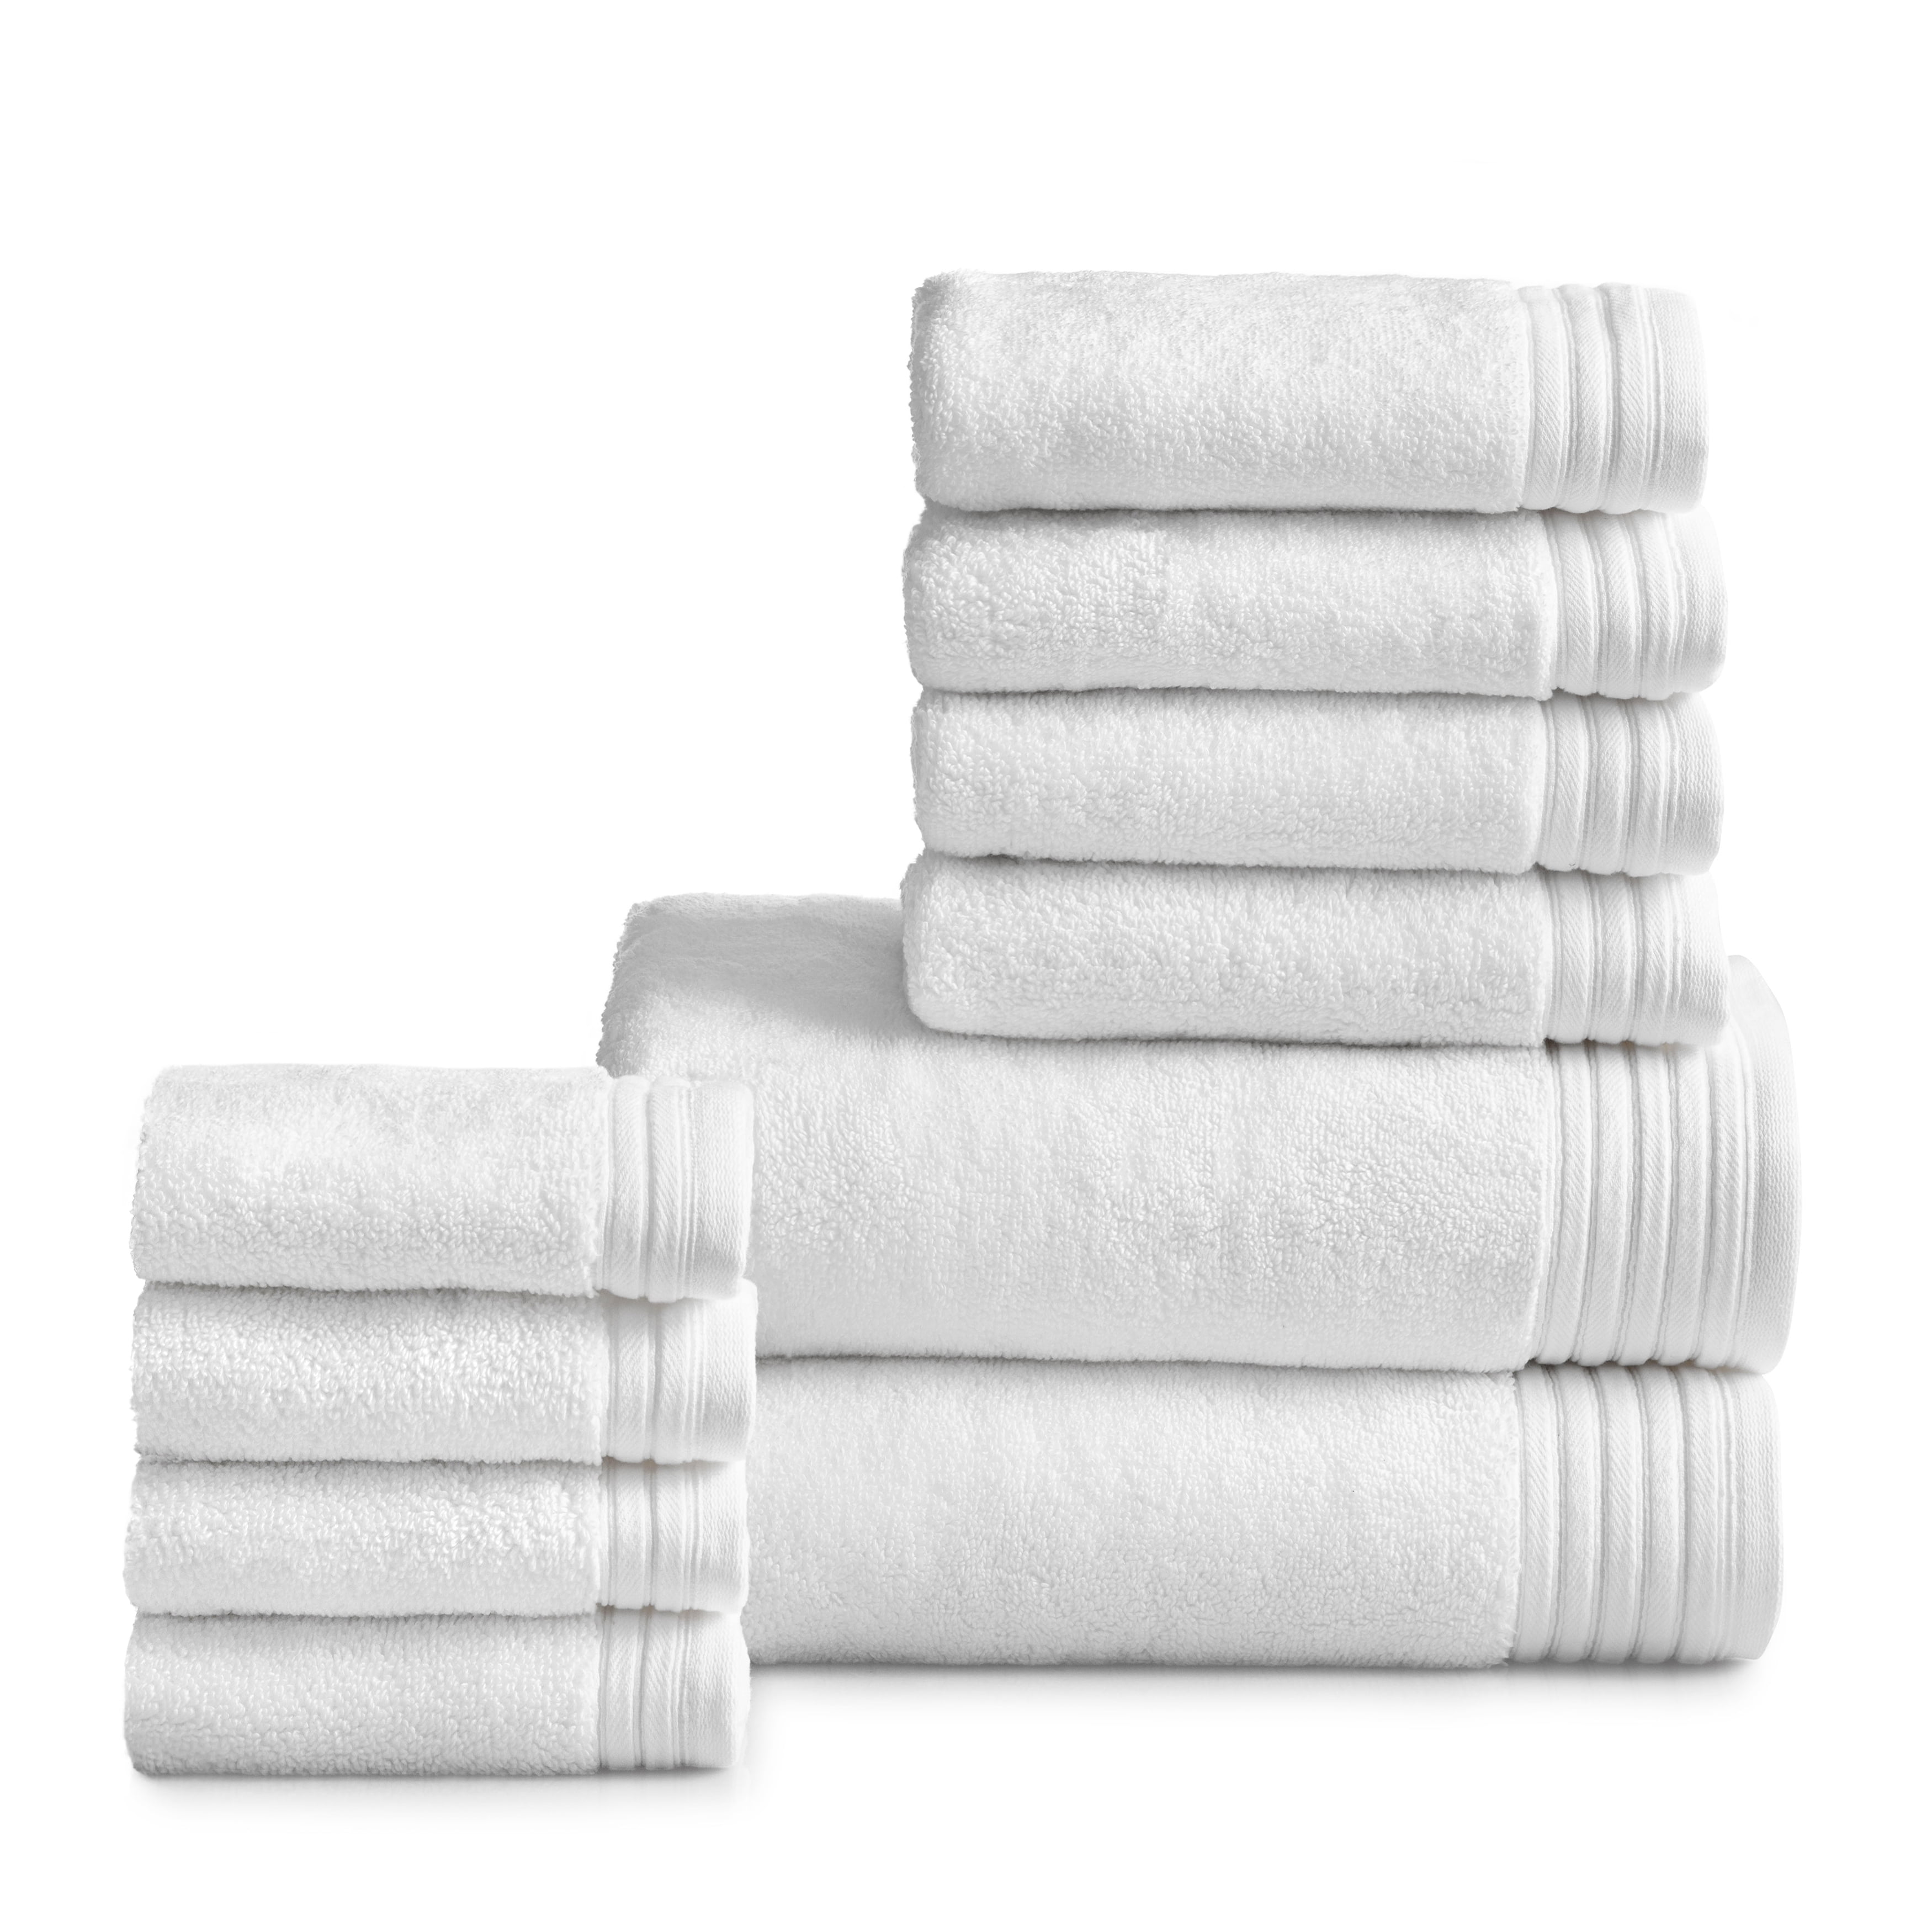 Details about   Mainstays Value 10-Pcs Cotton Towel Set with Upgraded Softness&Durability,White 